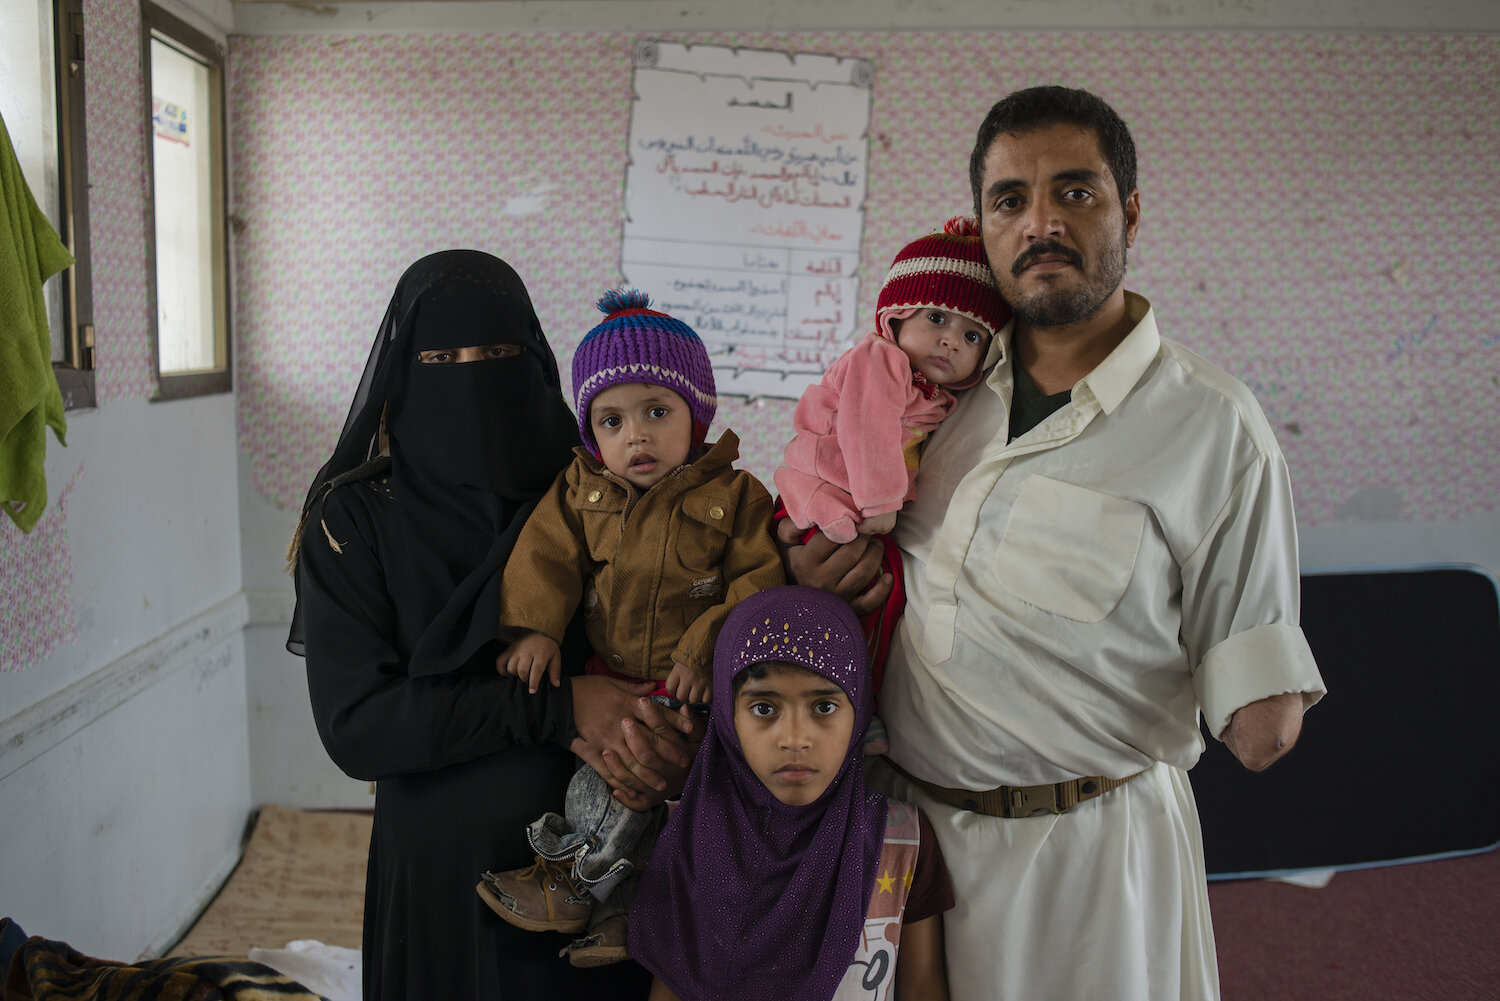  Mohammad Abdulrab Qahed stands for a portrait with his wife, Um Saad , and children Imad, Wiam, and Dua'a, at a school where they now live in Sana'a, Yemen on June 10, 2015. They are just one family out of the nearly 1.3 million Yemenis forced to le